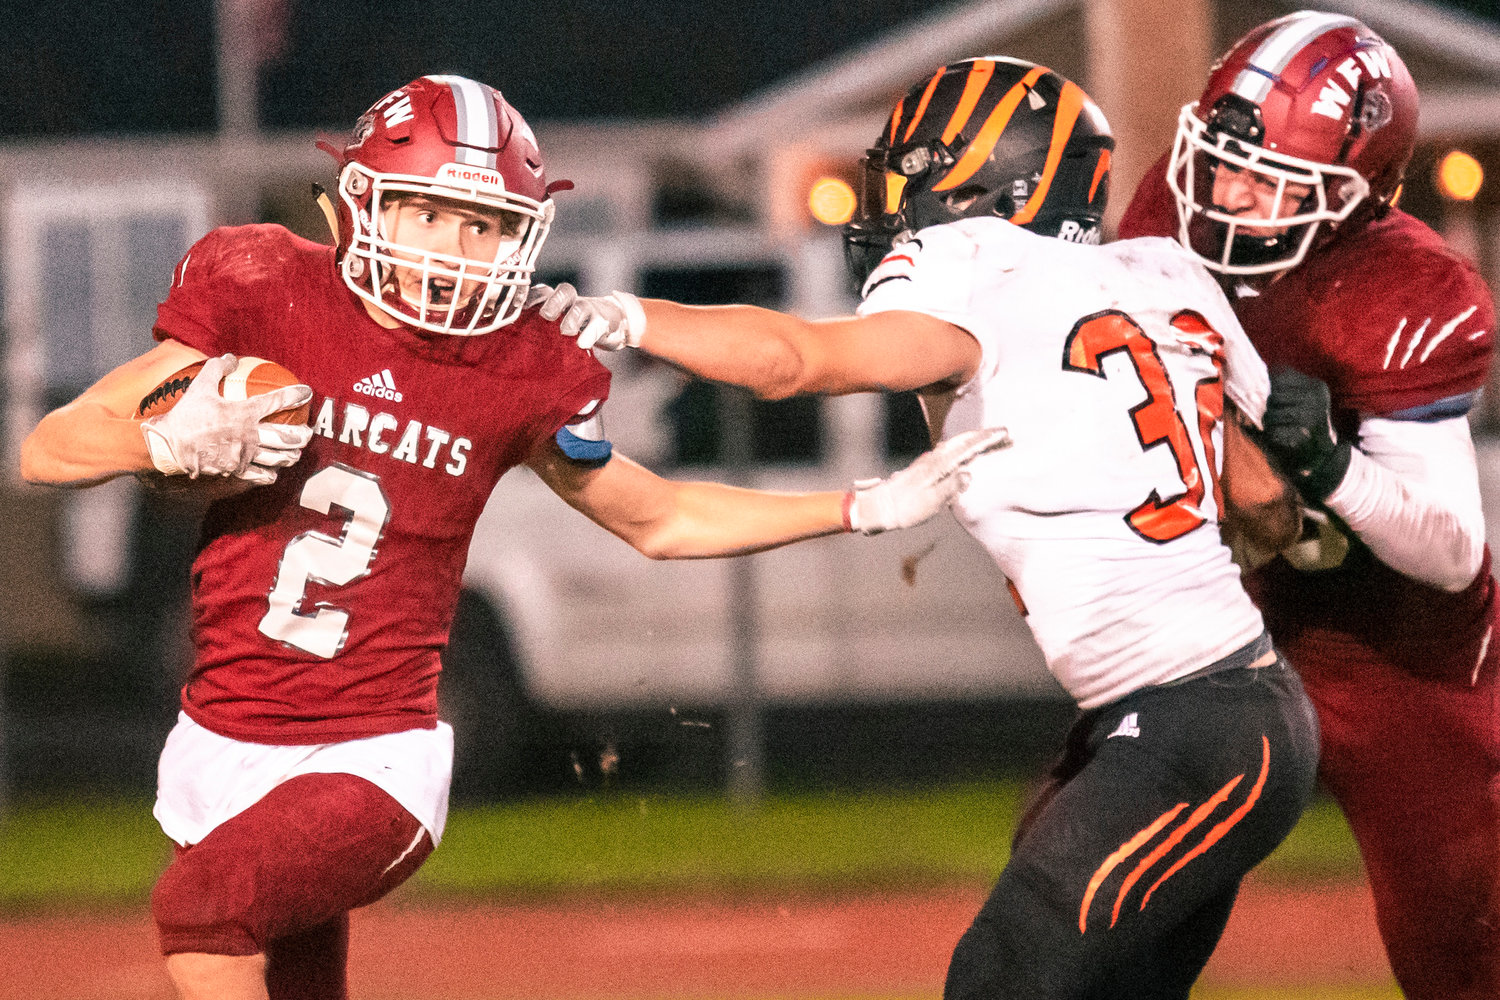 W.F. West’s Jacob Fuller (2) escapes trouble while running with the football Friday night during the Swamp Cup game at Bearcat Stadium.